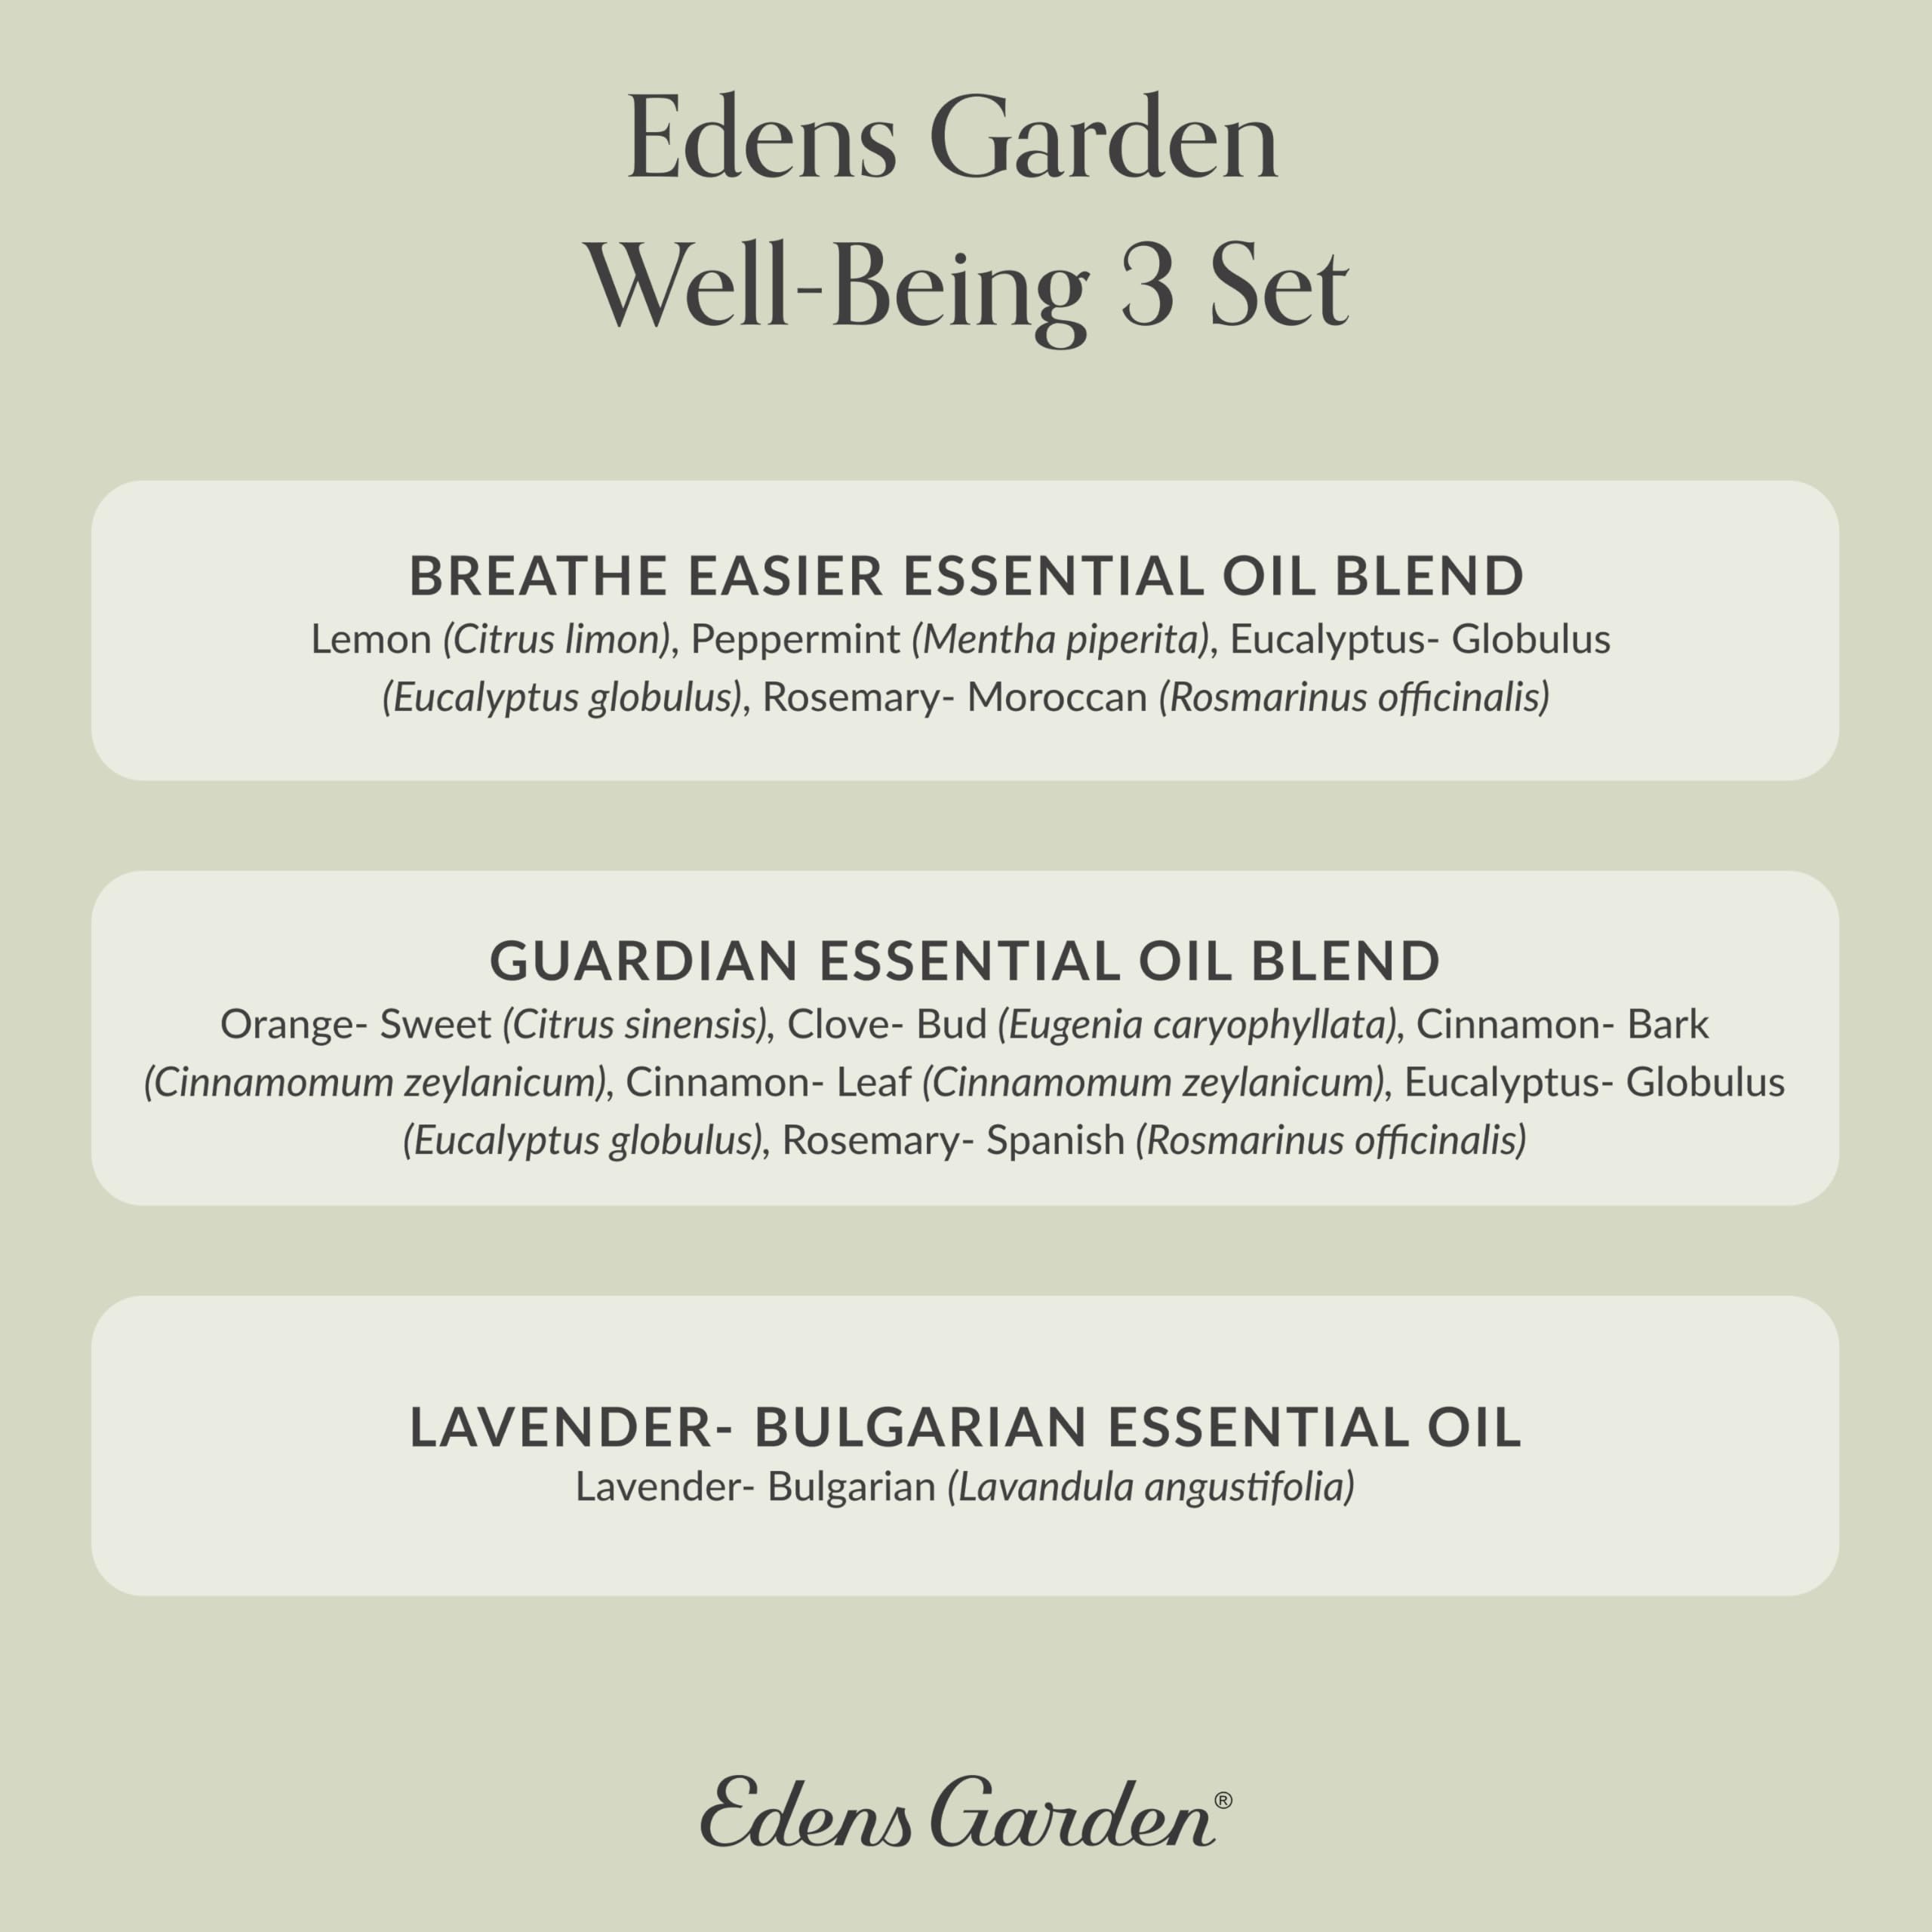 Edens Garden Essential Oil Well-Being Set, 3 Pure Essential Oils for Diffusers for Home, Aromatherapy Diffuser Oil Scents - Breathe Easier, Guardian, Lavender- 3 x 10 ml by Edens Garden